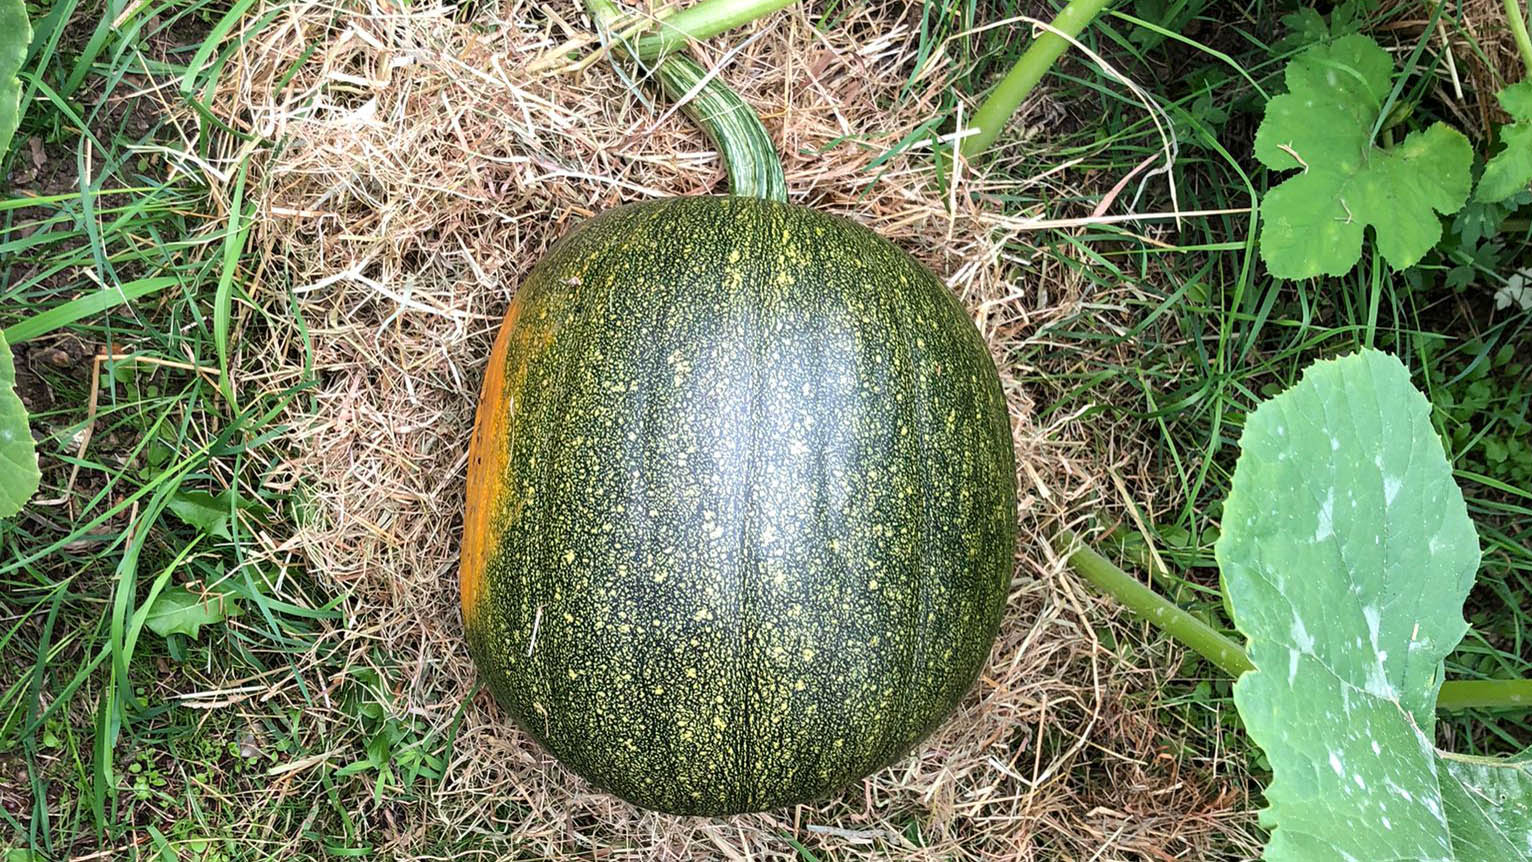 A home-grown pumpkin which has prematurely turned orange and flattened on one side